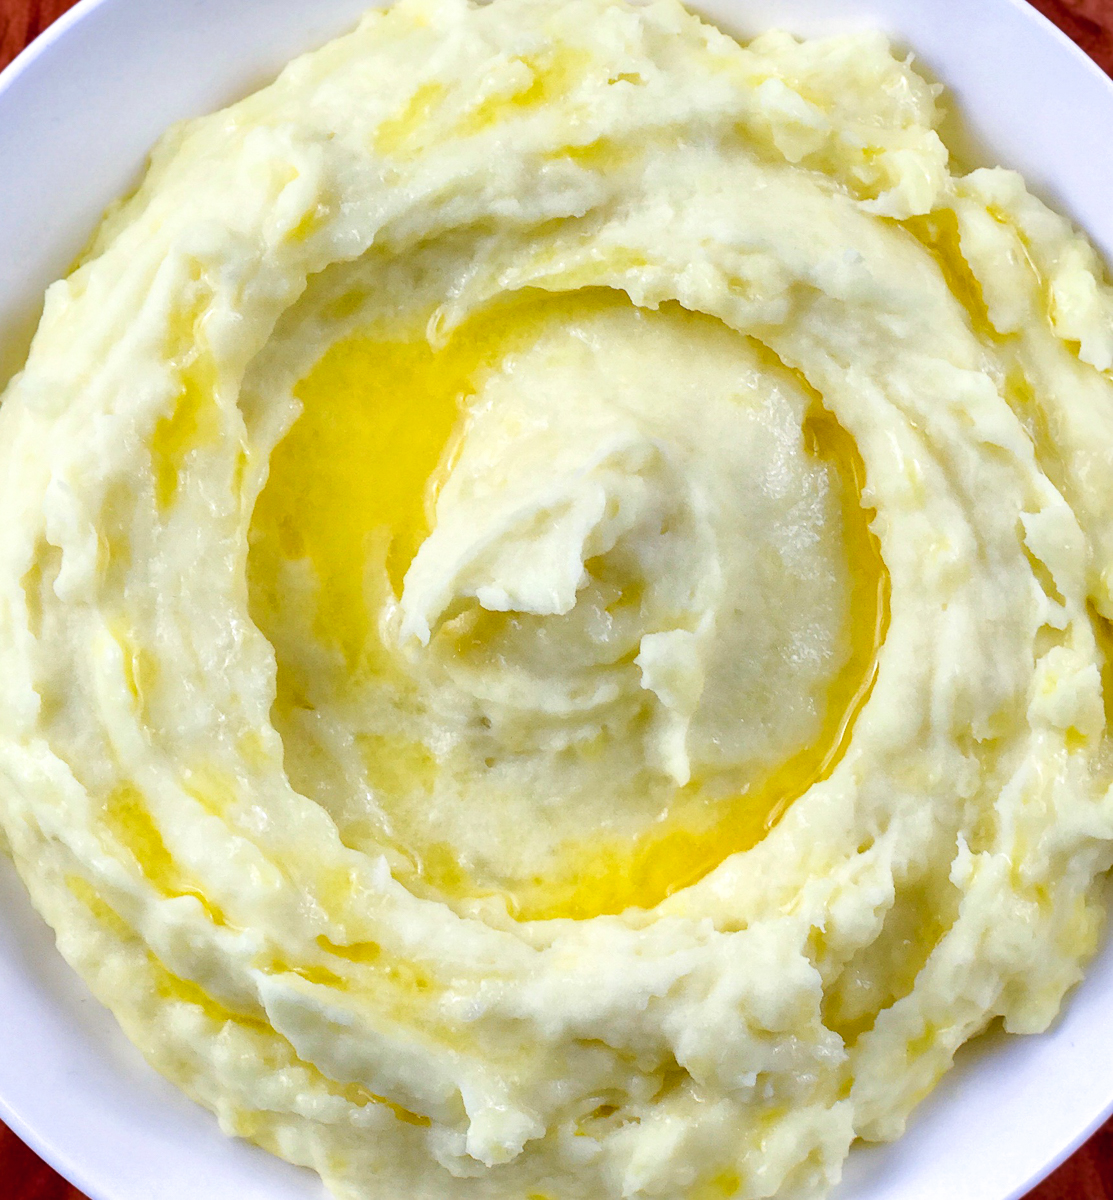 Perfected mashed potatoes.